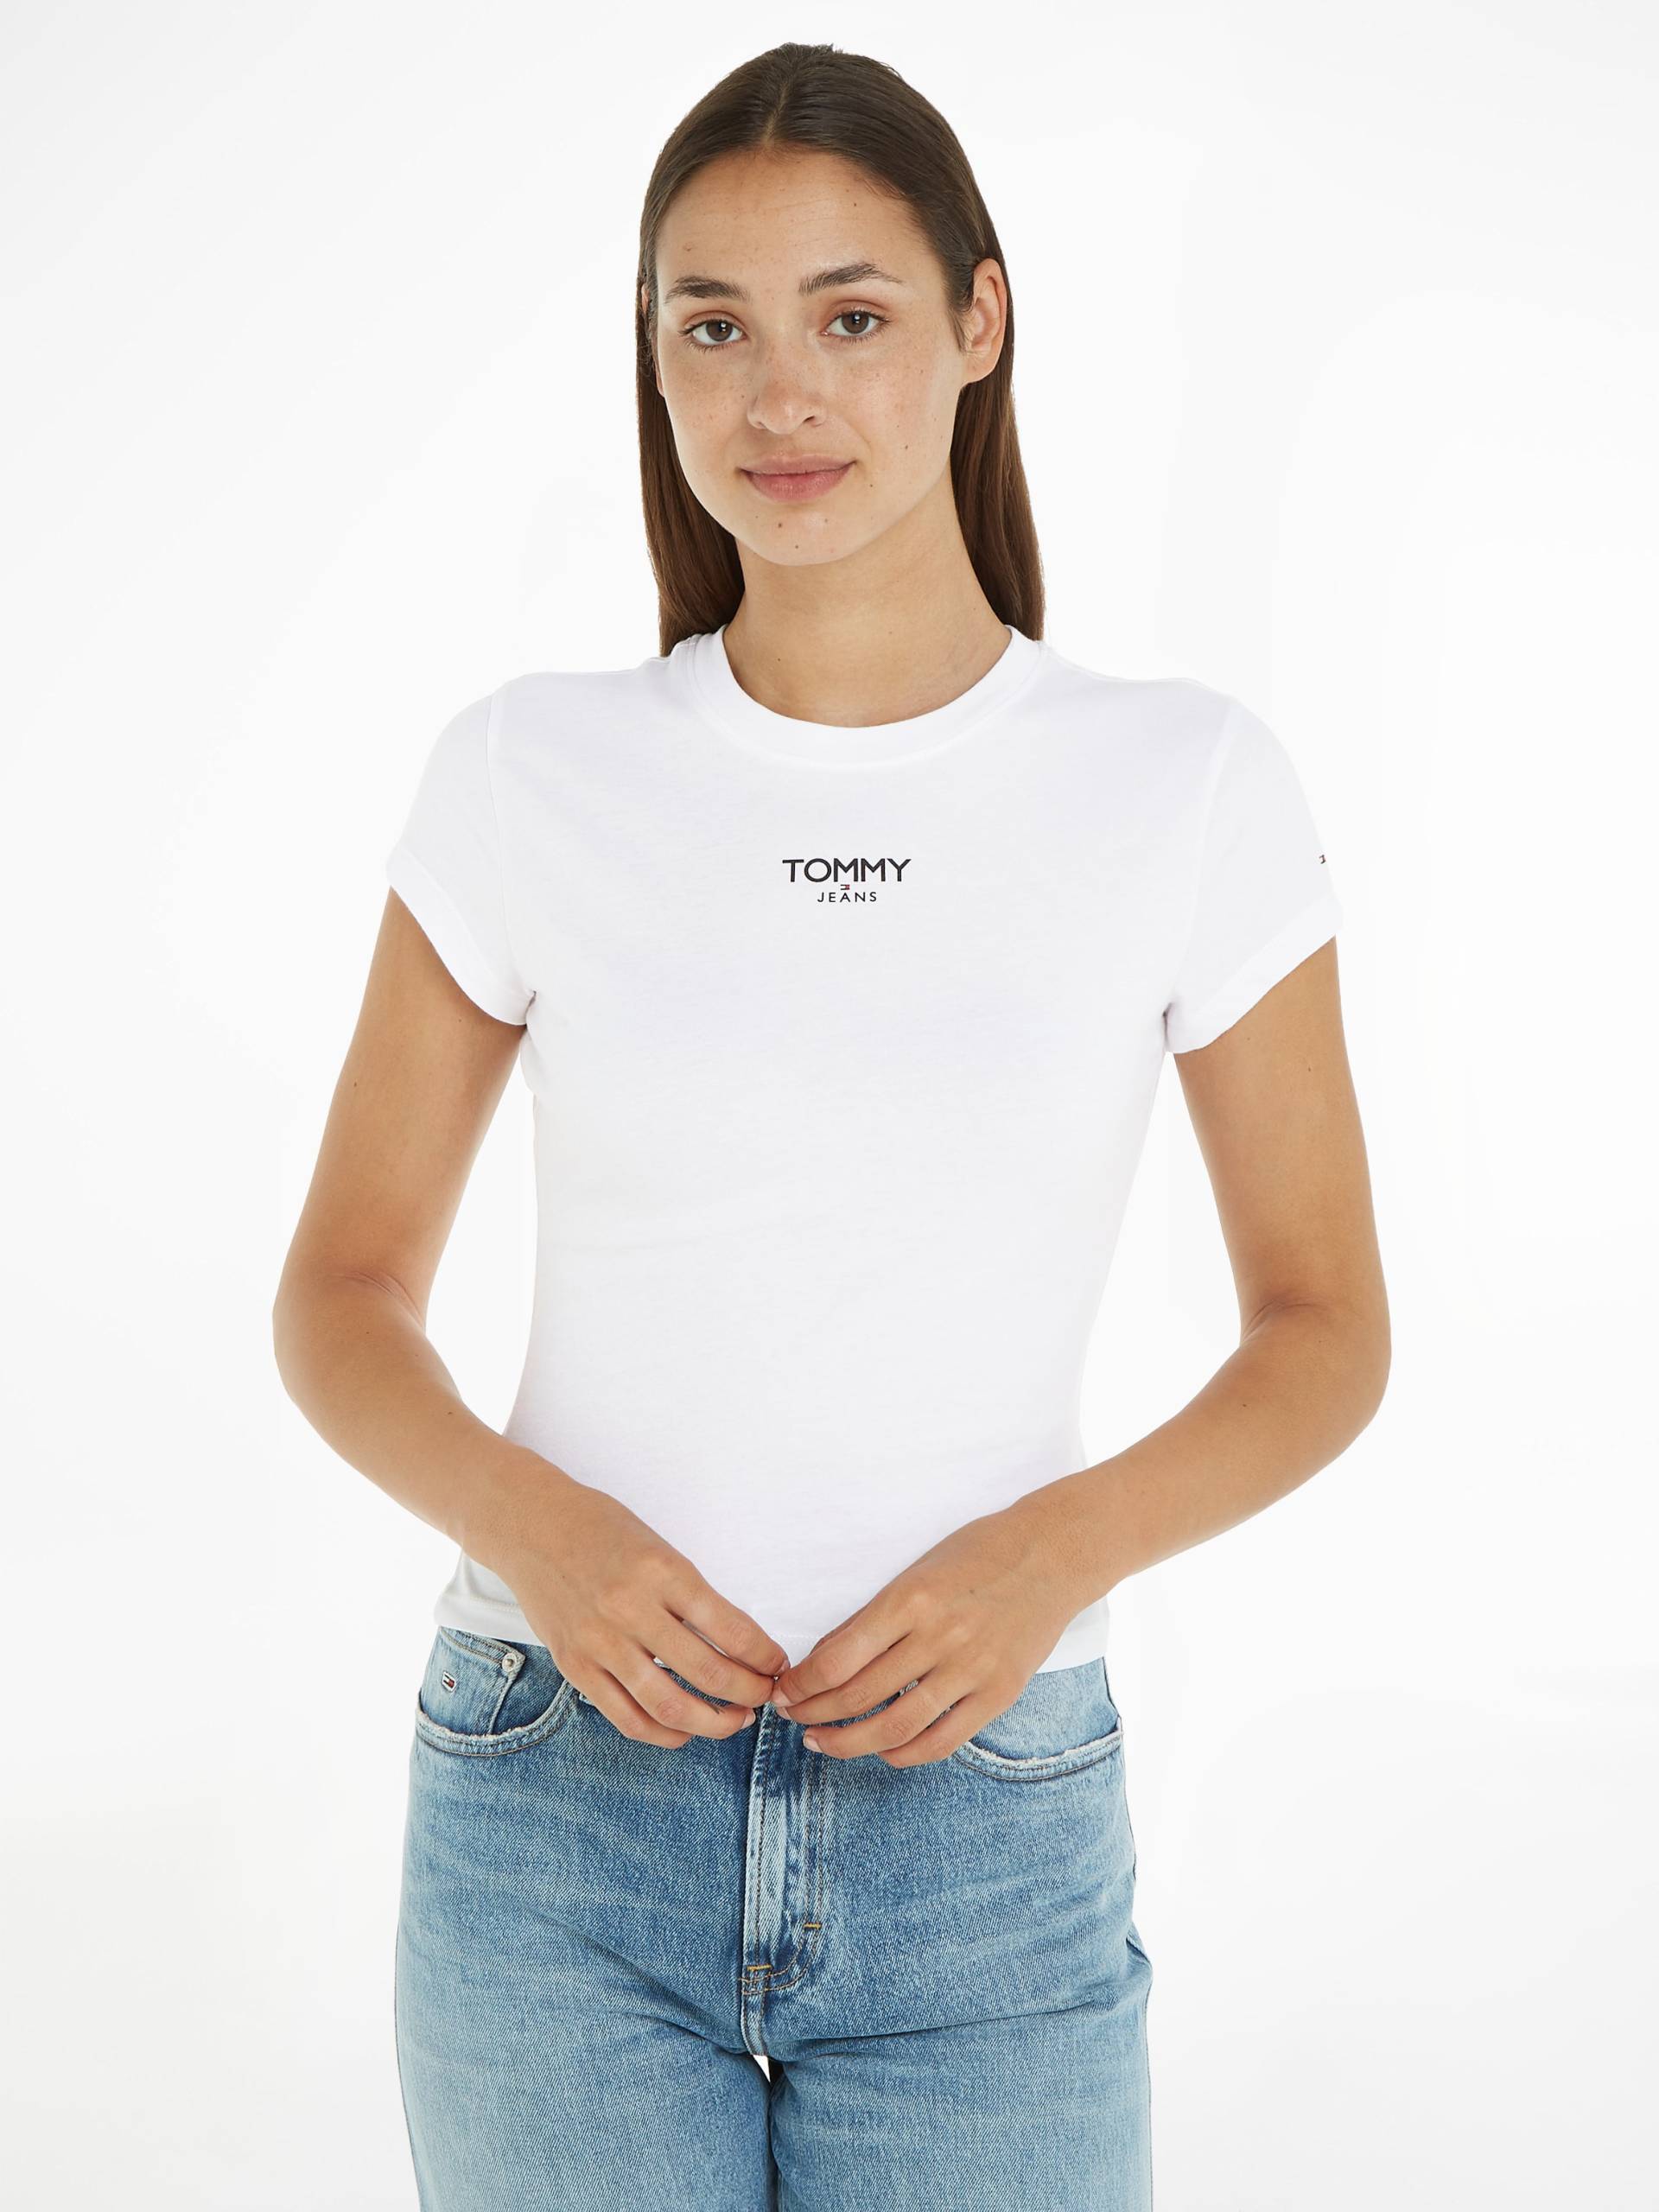 Tommy Jeans T-Shirt »TJW BBY ESSENTIAL LOGO 1 SS« von Tommy Jeans